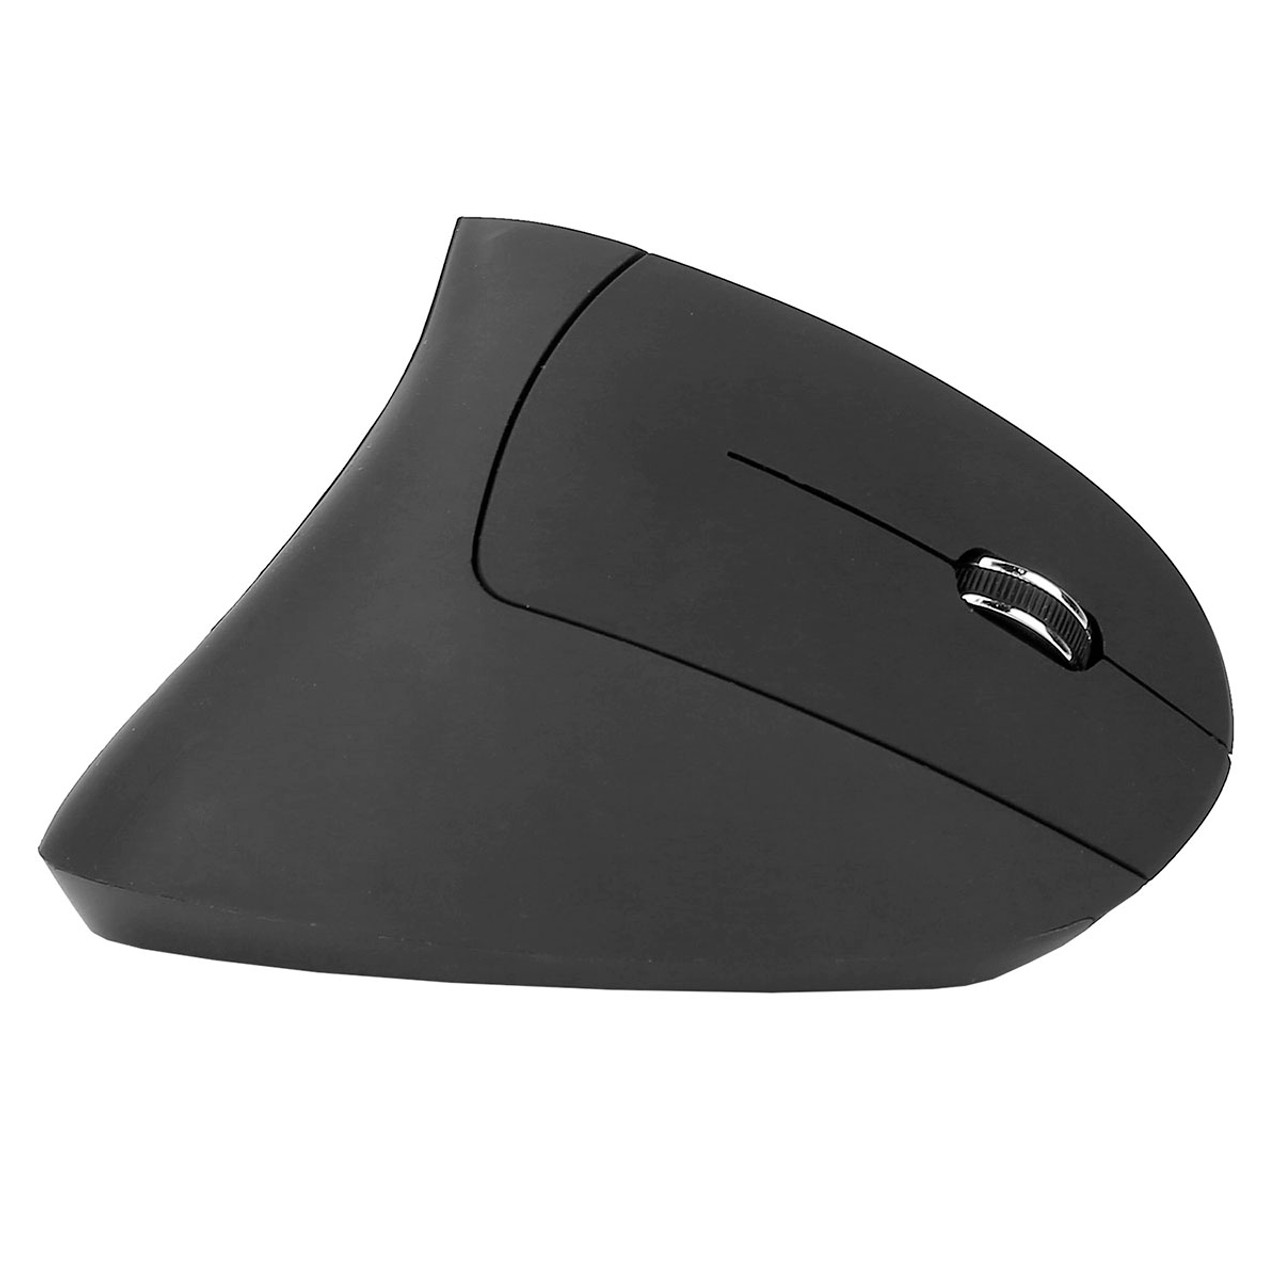 iNova™ 2.4G Wireless Vertical Mouse product image